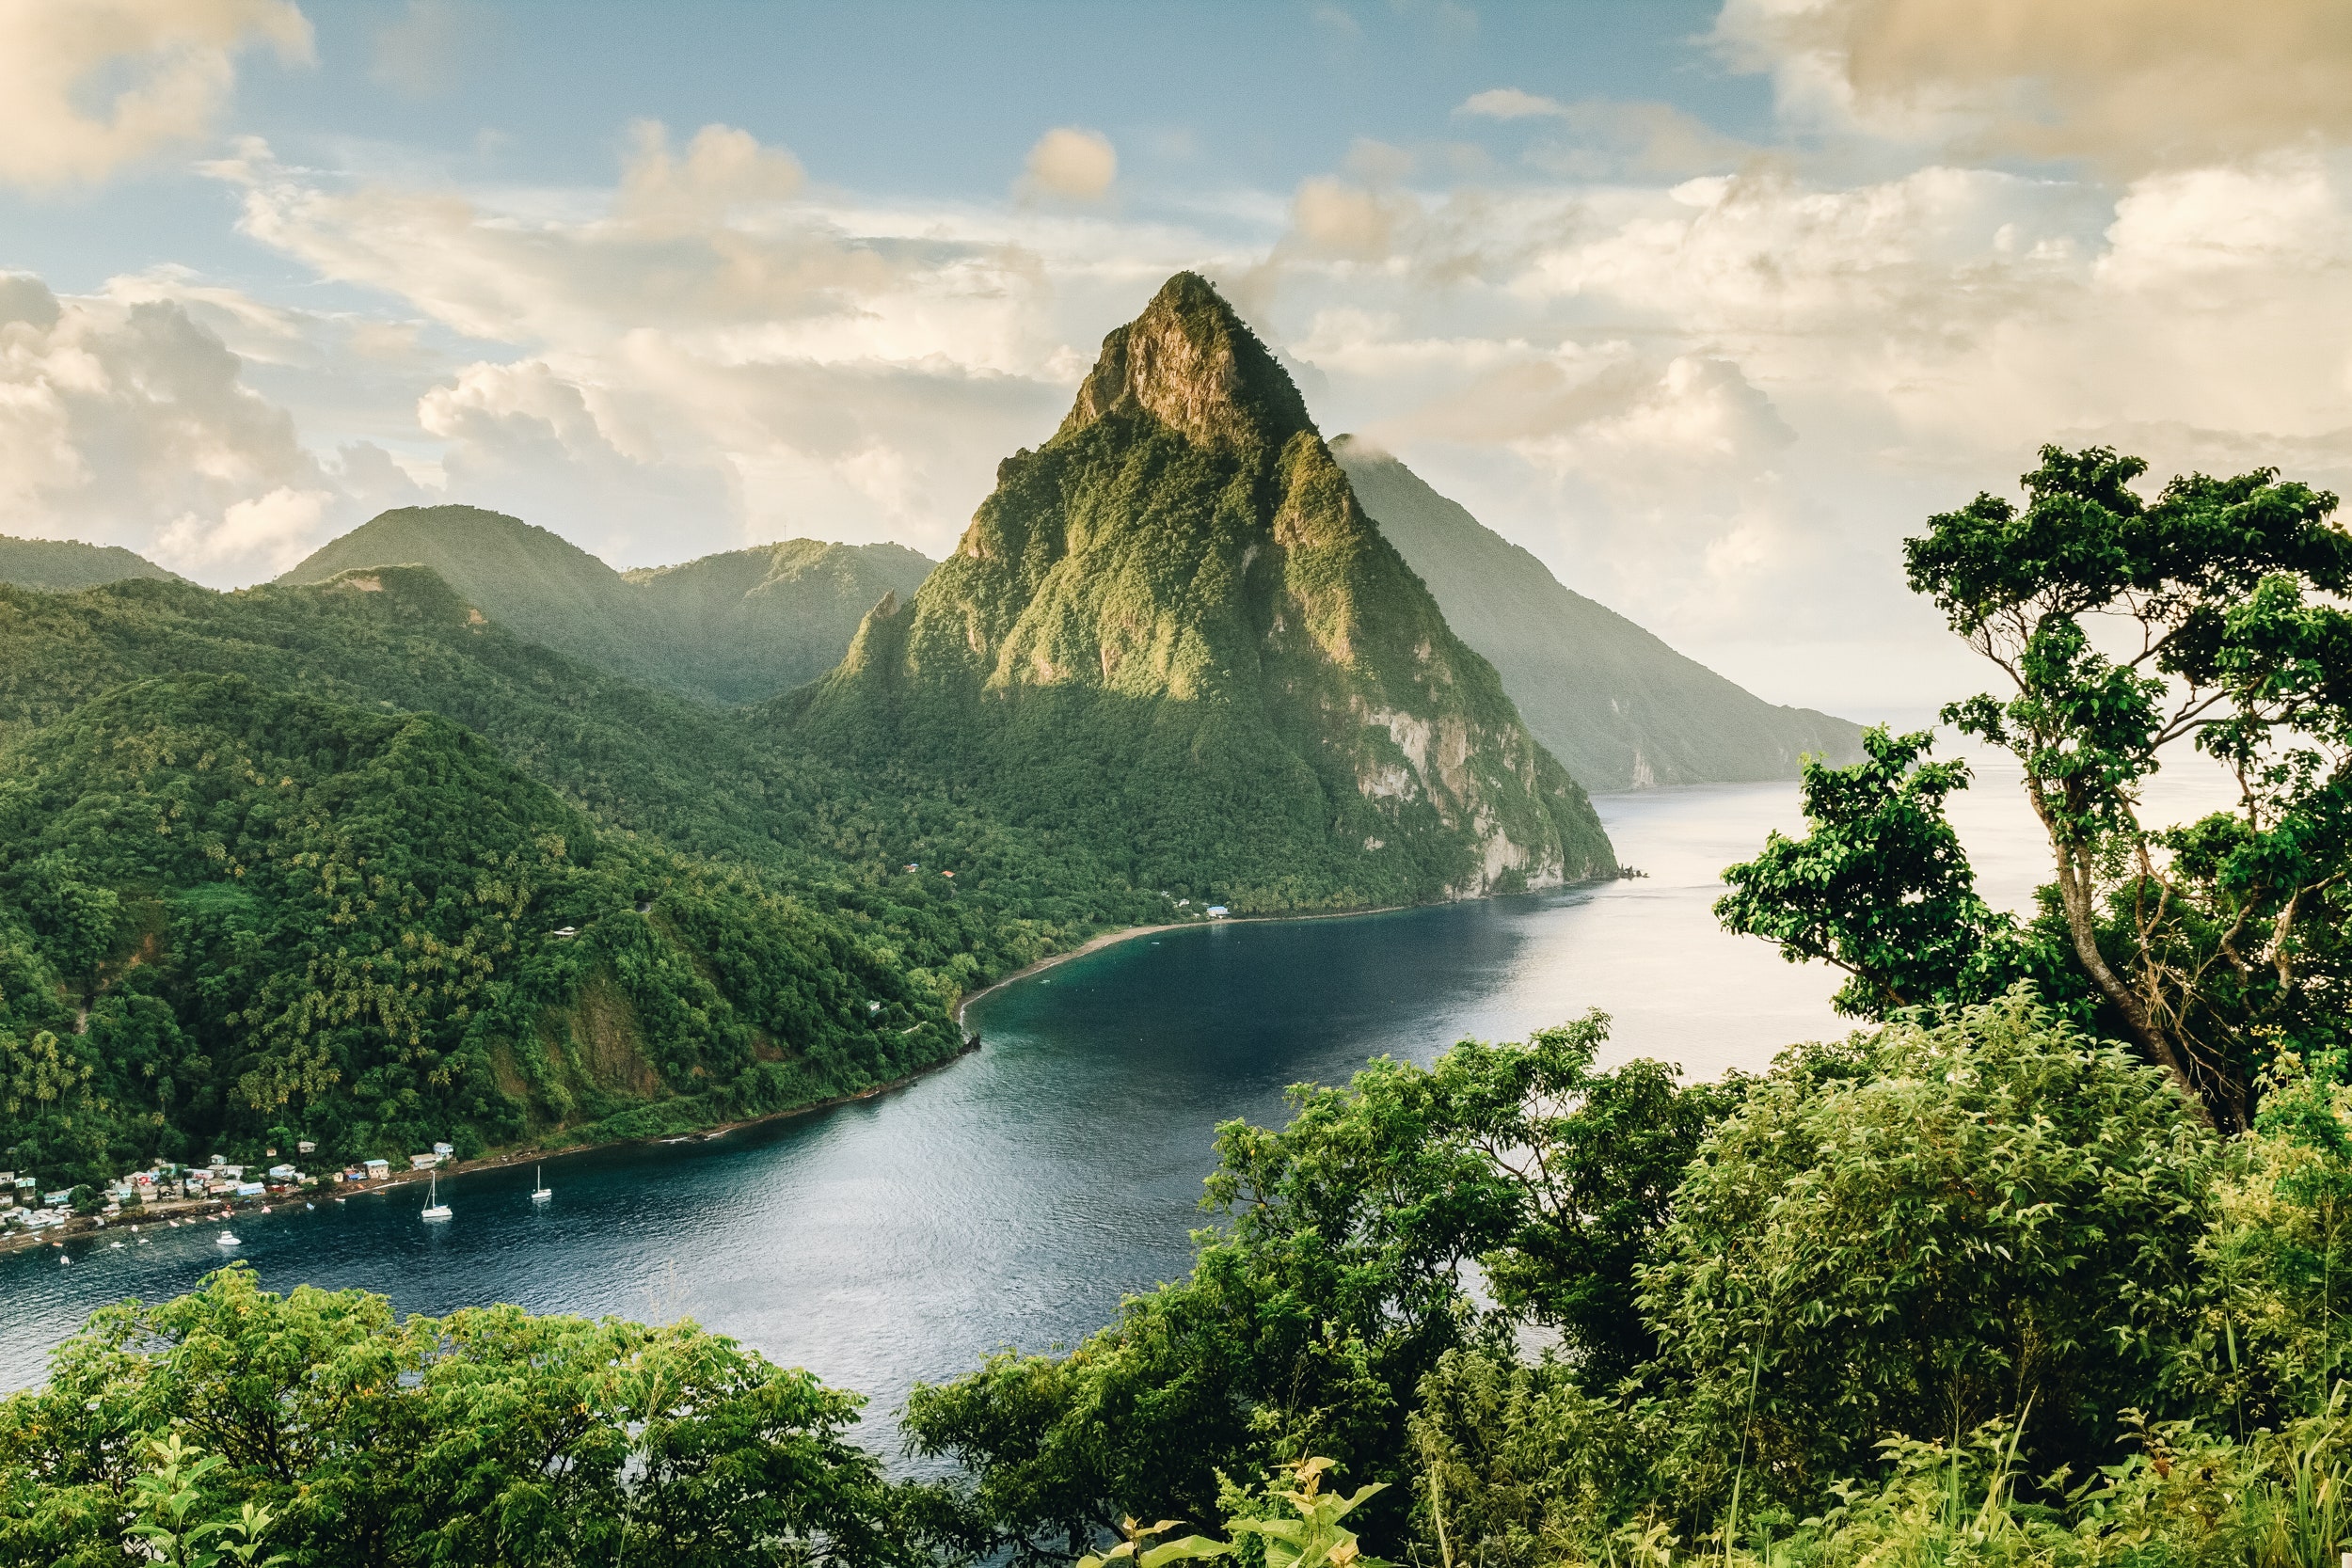 The scenery of St. Lucia can be summed up in one jaw-dropping site: a duo of striking spires known as the Pitons. The two volcanic peaks—Gros Piton and Petit Piton—are the most iconic landmarks on the island, and visitors can enjoy them in a variety of ways. A singular experience has to be actually hiking the mountains, an activity which takes the better part of a day. Or, if you prefer to keep your feet at sea level, plop a towel down at Sugar Beach, set dramatically (and conveniently) between the two Pitons.<p>Sign up to receive the latest news, expert tips, and inspiration on all things travel</p><a href="https://www.cntraveler.com/newsletter/the-daily?sourceCode=msnsend">Inspire Me</a>